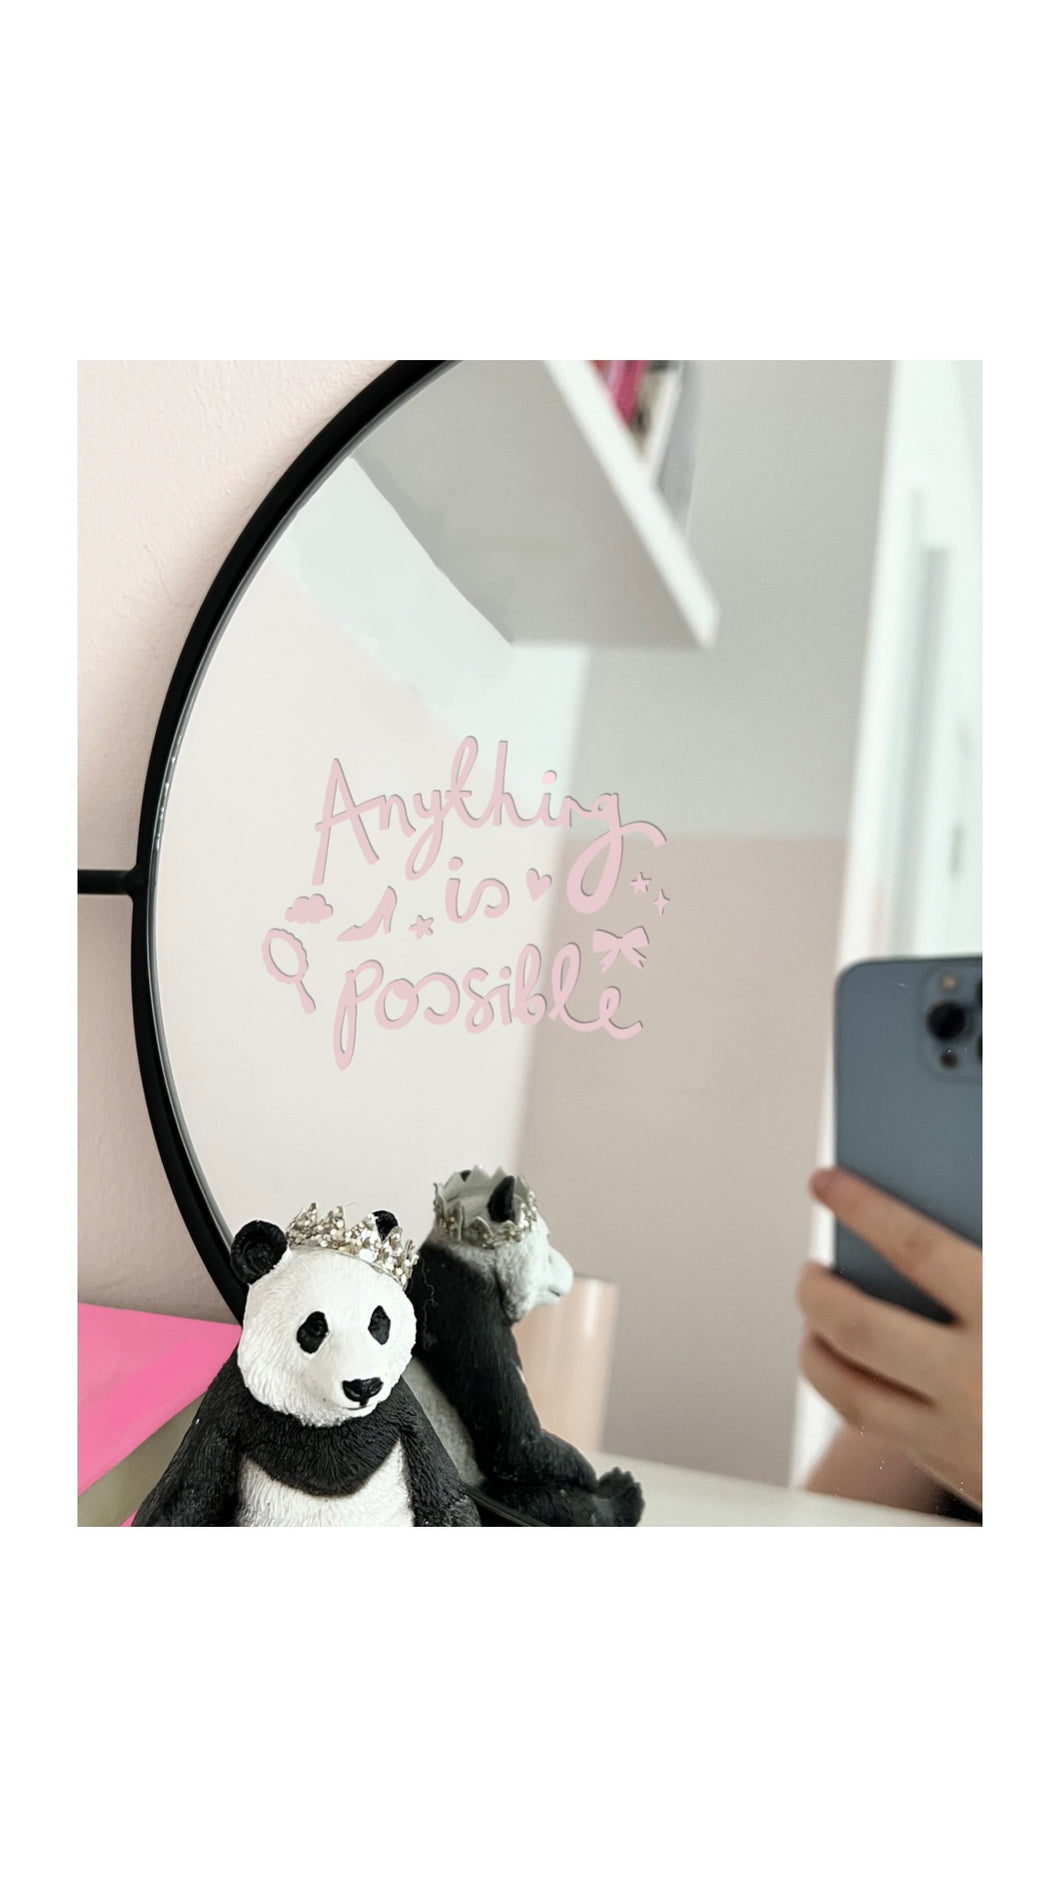 ‘Anything Is Possible’ Mirror Sticker